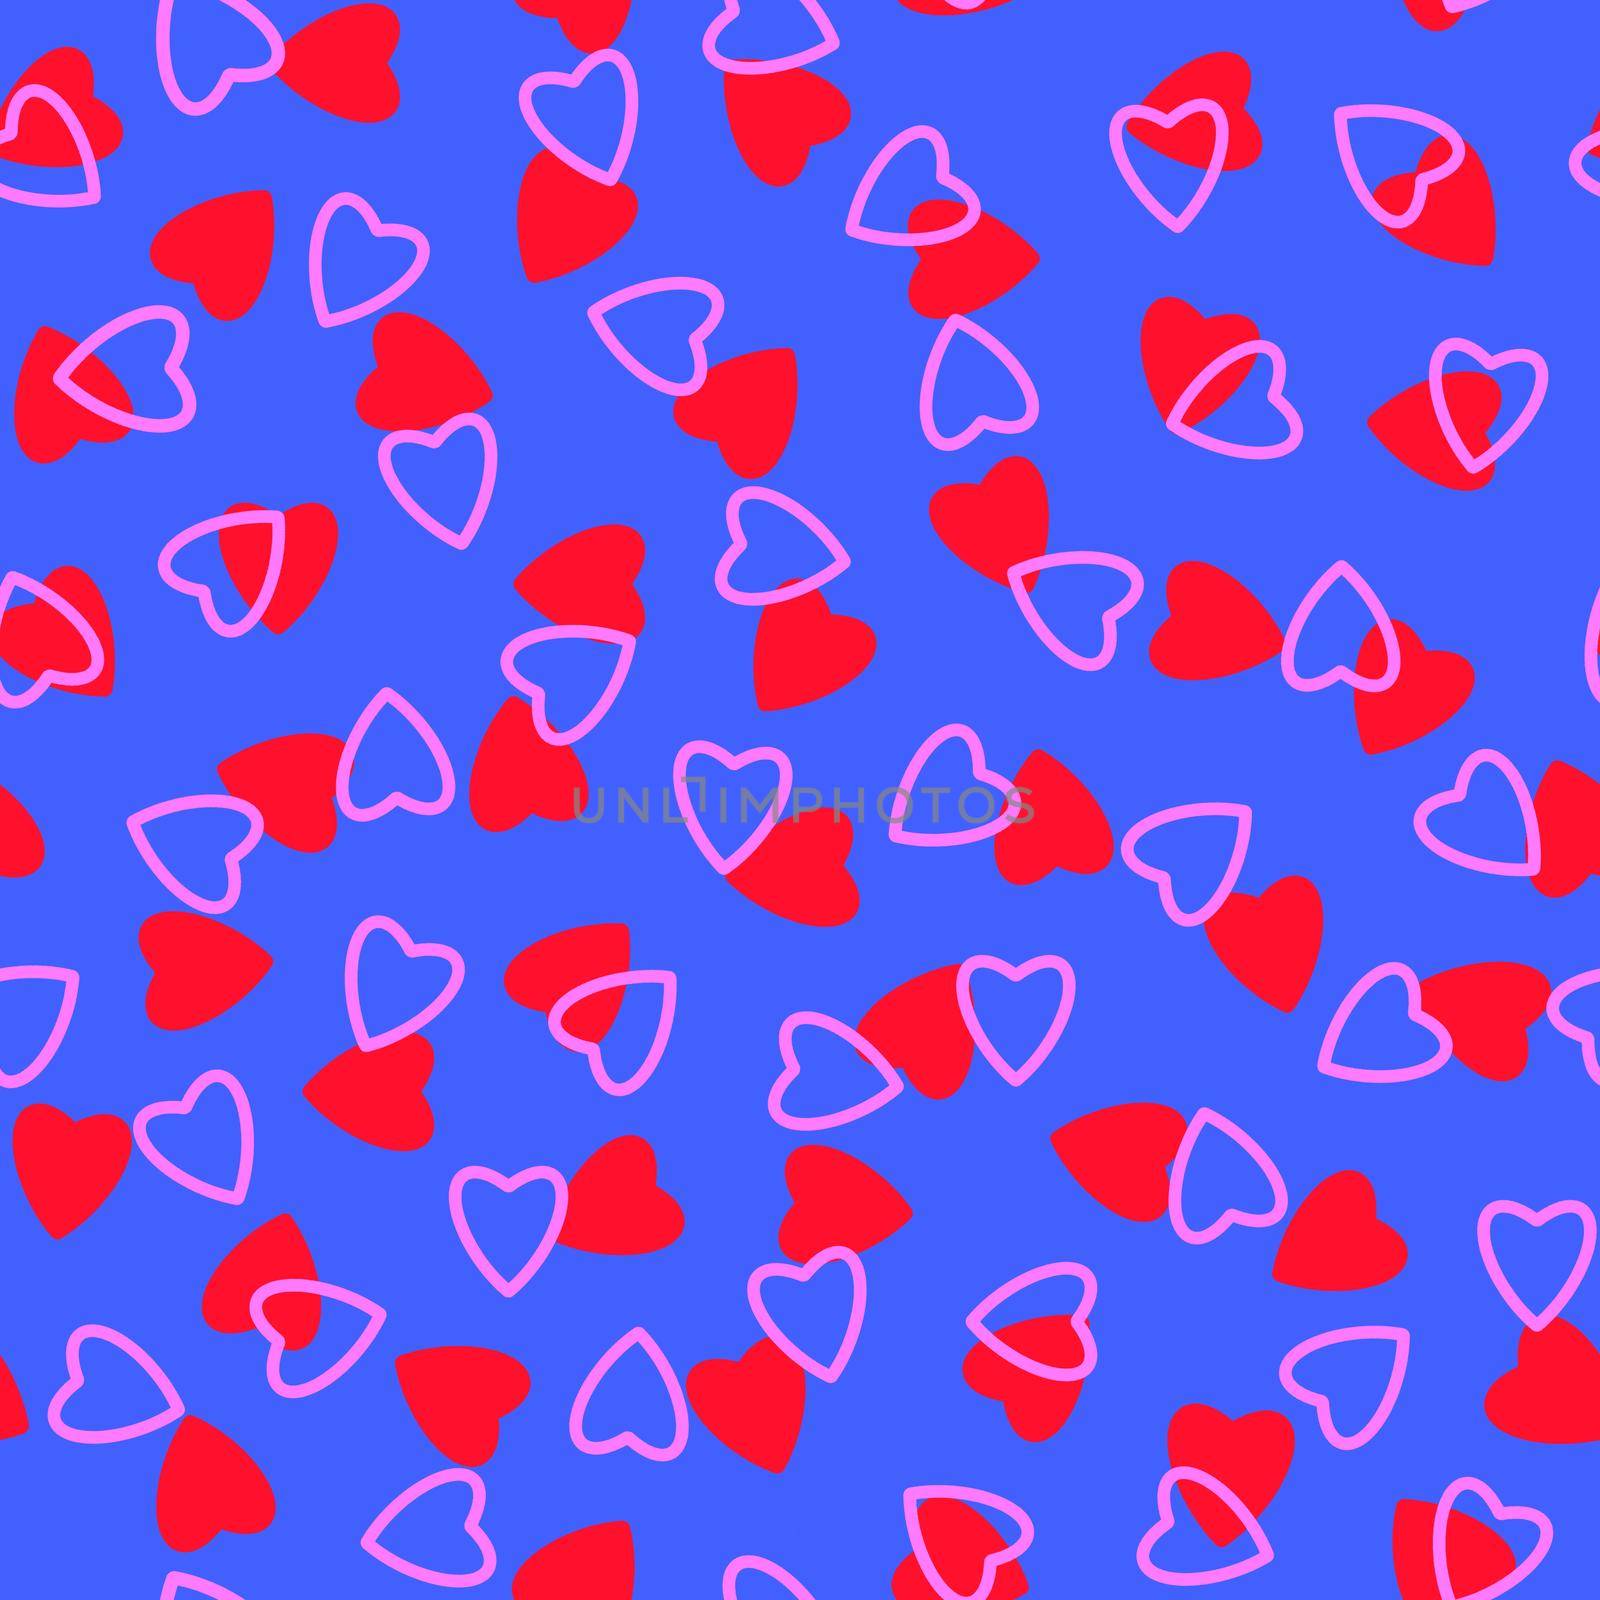 Simple hearts seamless pattern,endless chaotic texture made of tiny heart silhouettes.Valentines,mothers day background.Great for Easter,wedding,scrapbook,gift wrapping paper,textiles.Red,pink,blue.